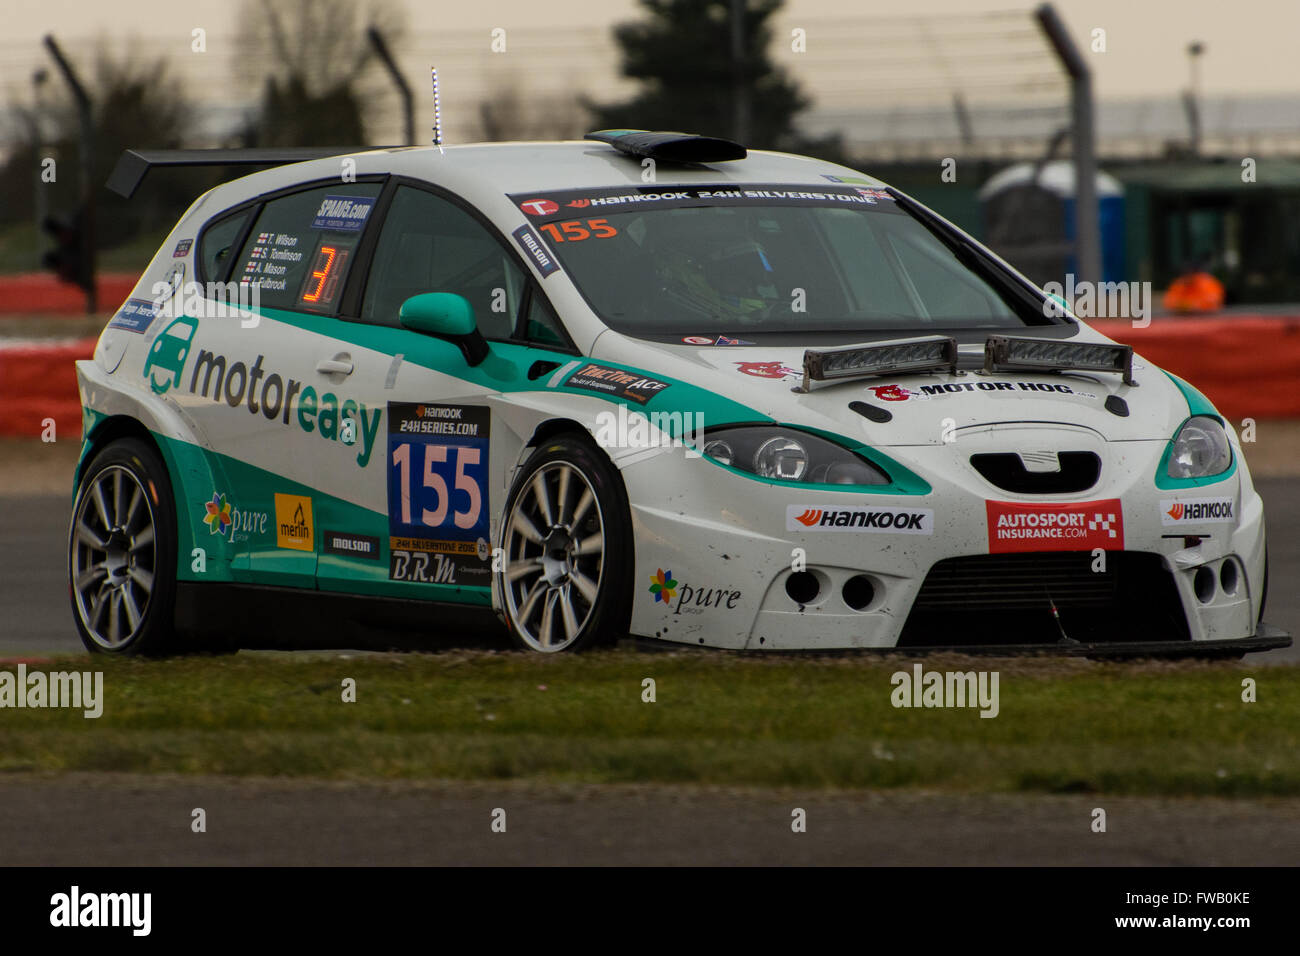 Towcester, Northamptonshire, UK. 2nd April, 2016. Motoreasy Racing Seat Leon Supercopa during the Hankook 24 Hours Touring Car Series at Silverstone Circuit (Photo by Gergo Toth / Alamy Live News) Stock Photo